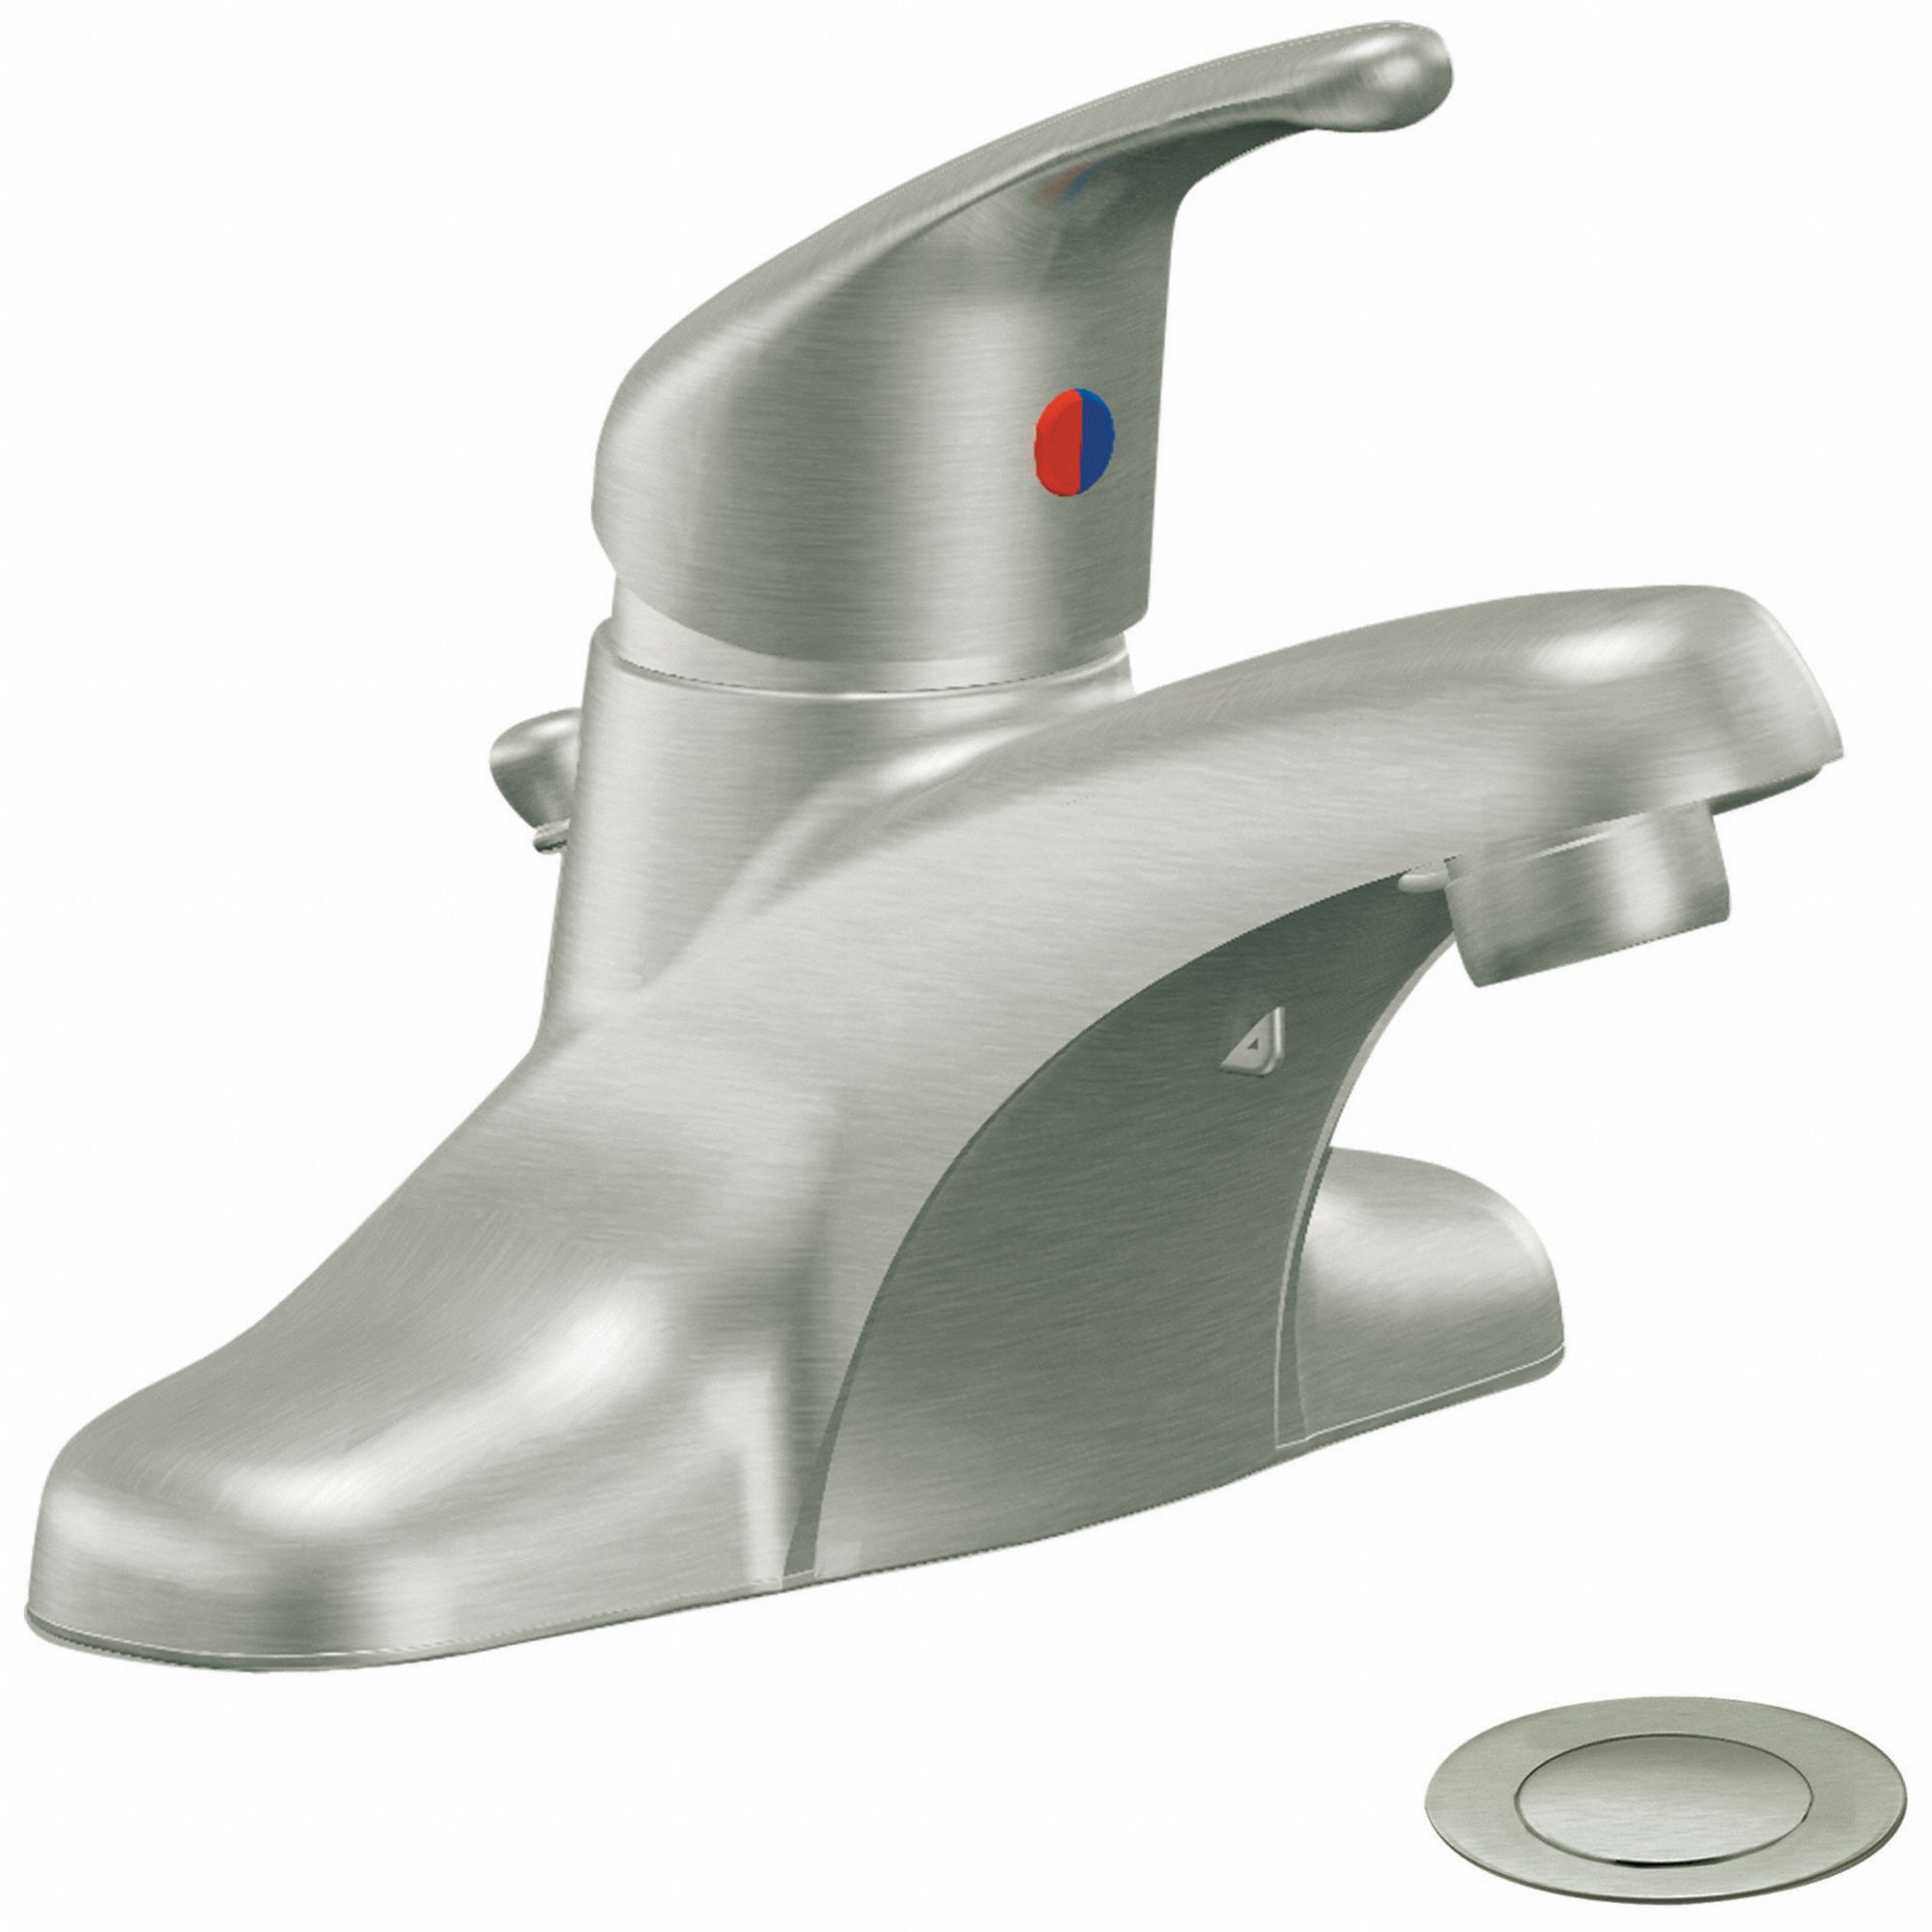 Bathroom Faucet: Cornerstone®, Brushed Nickel Finish, 1.5 gpm Flow Rate, Drain with Pop-Up Rod Drain